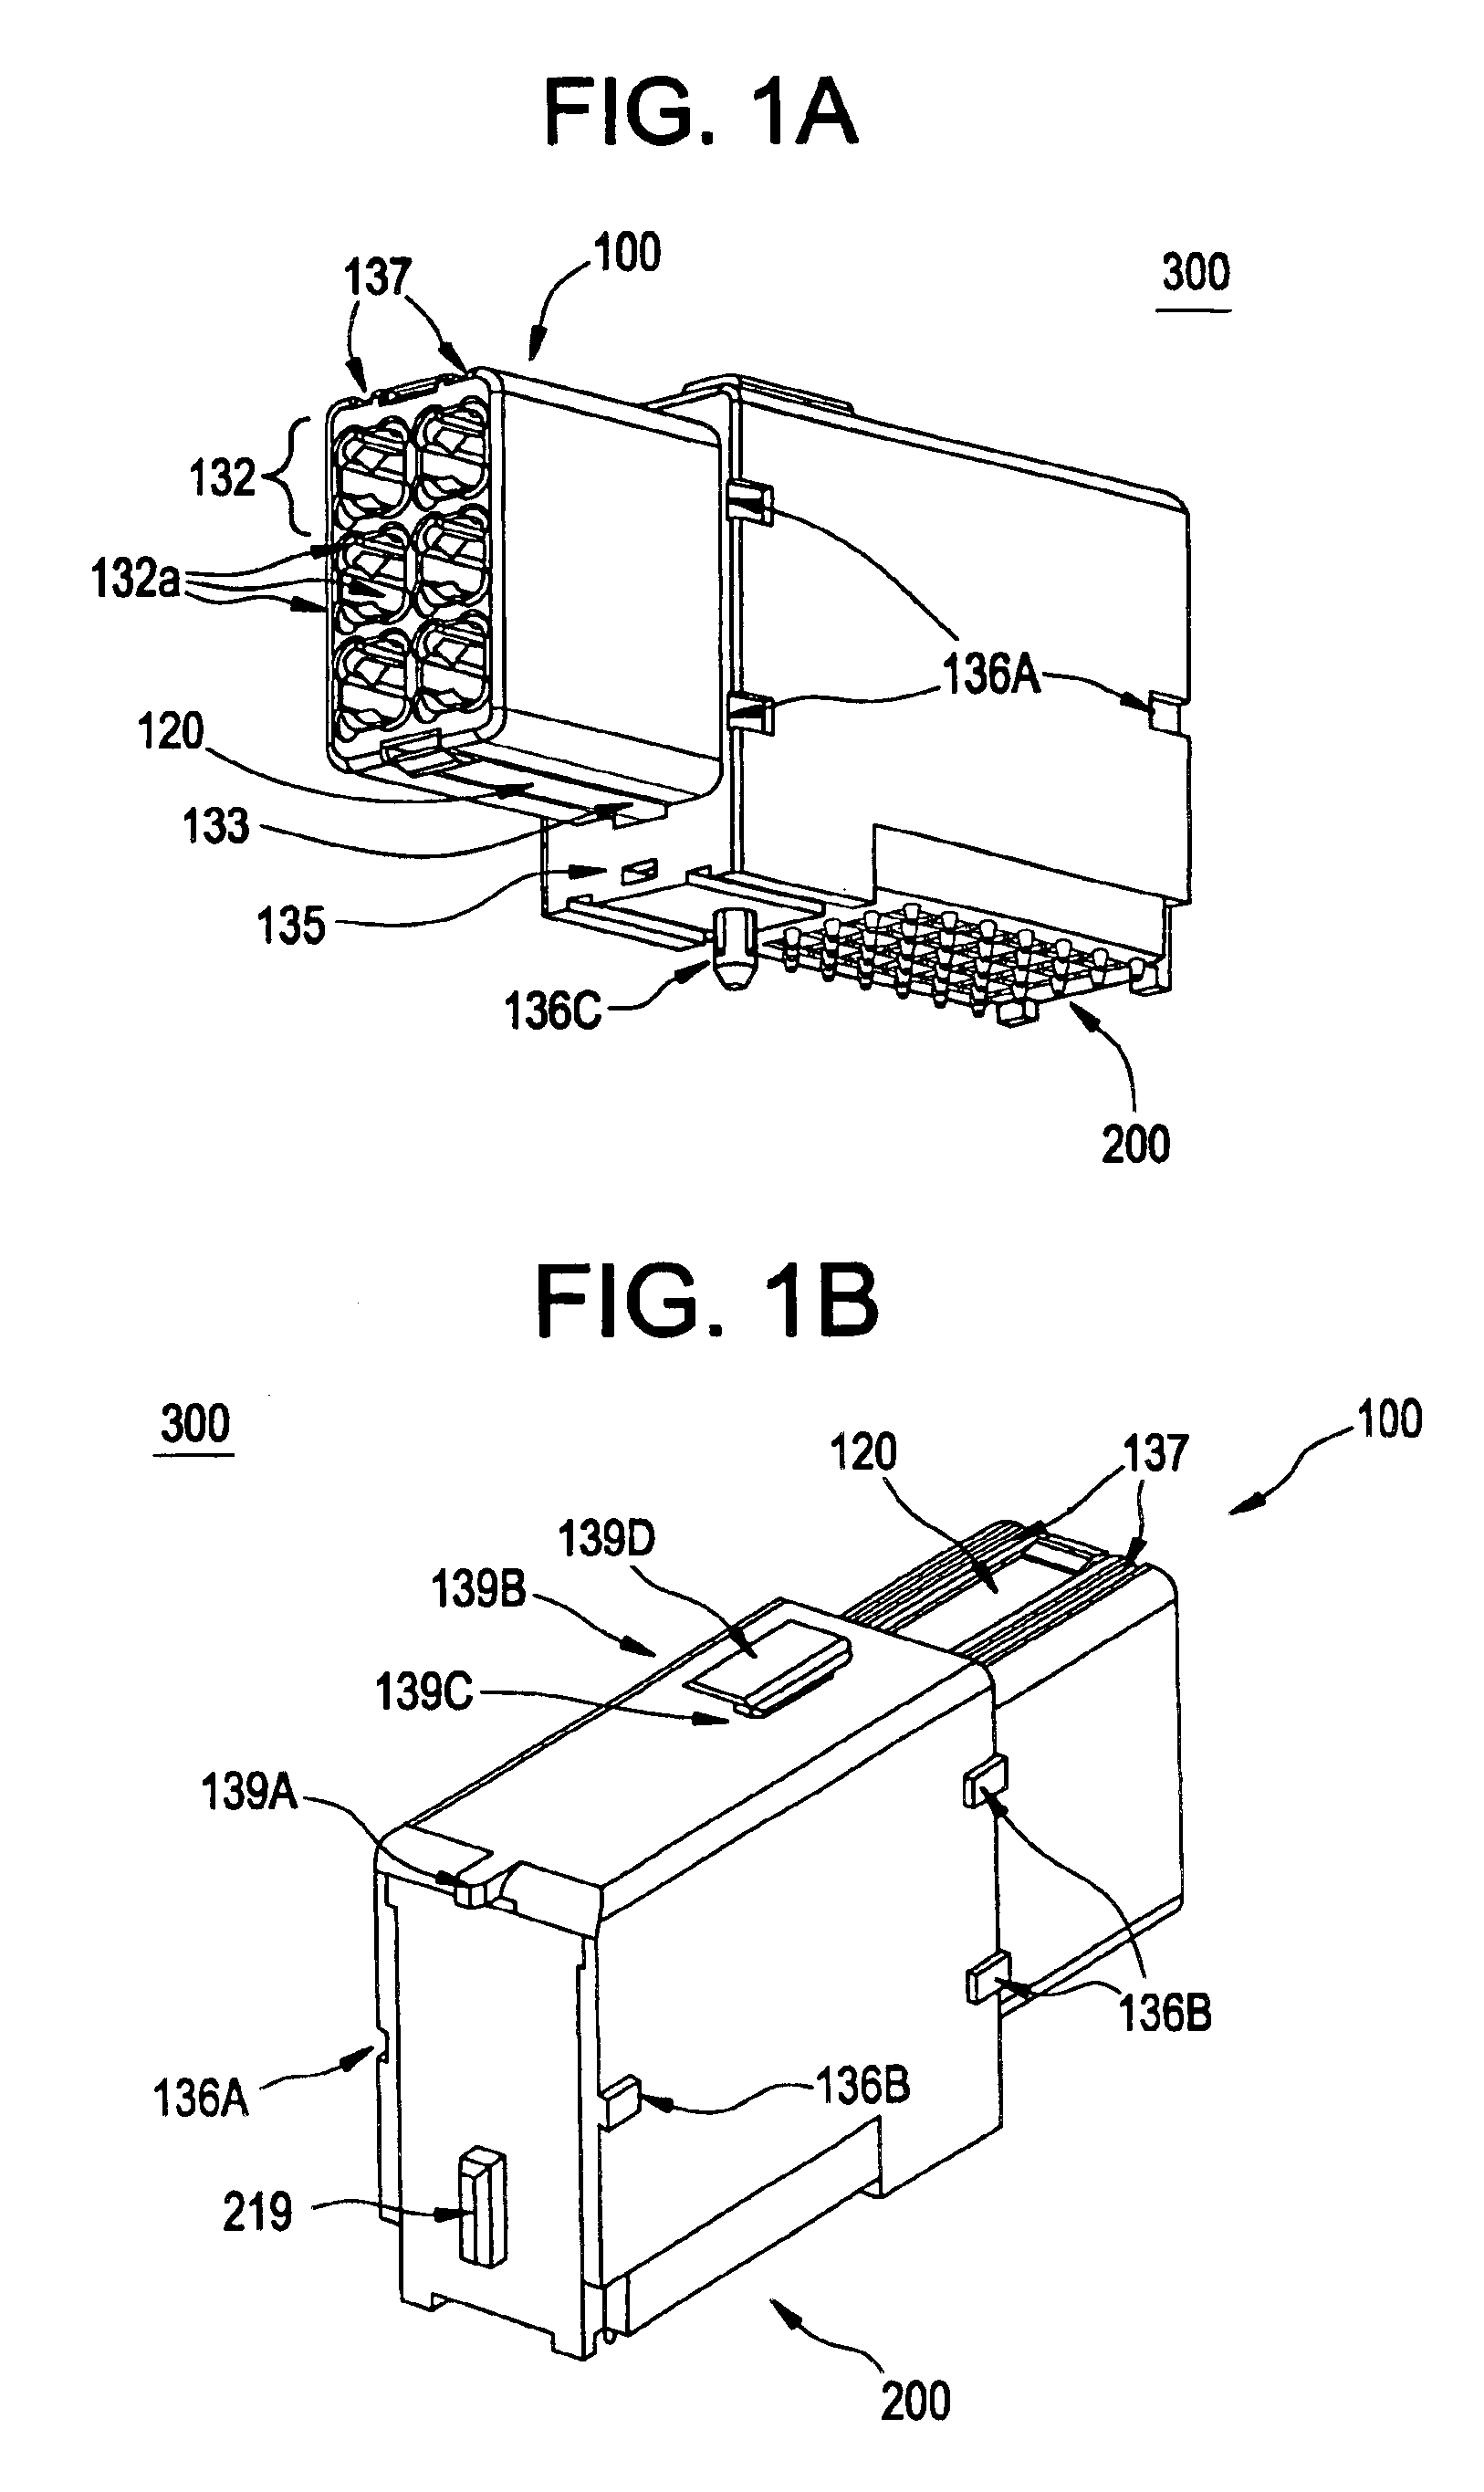 Modular coaxial electrical interconnect system having a modular frame and electrically shielded signal paths and a method of making the same